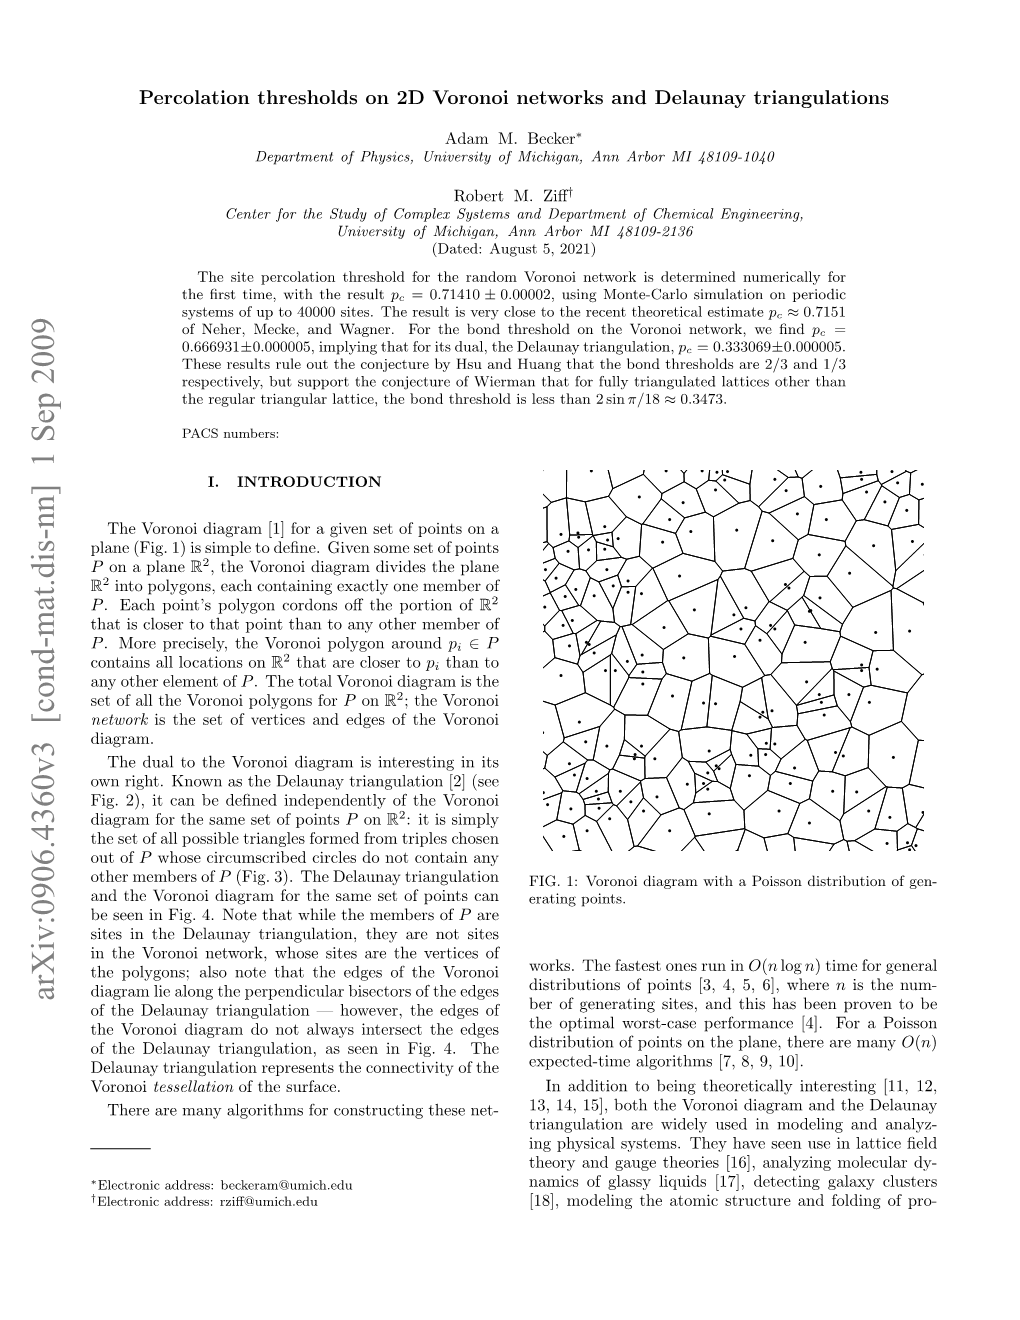 Percolation Thresholds on 2D Voronoi Networks and Delaunay Triangulations